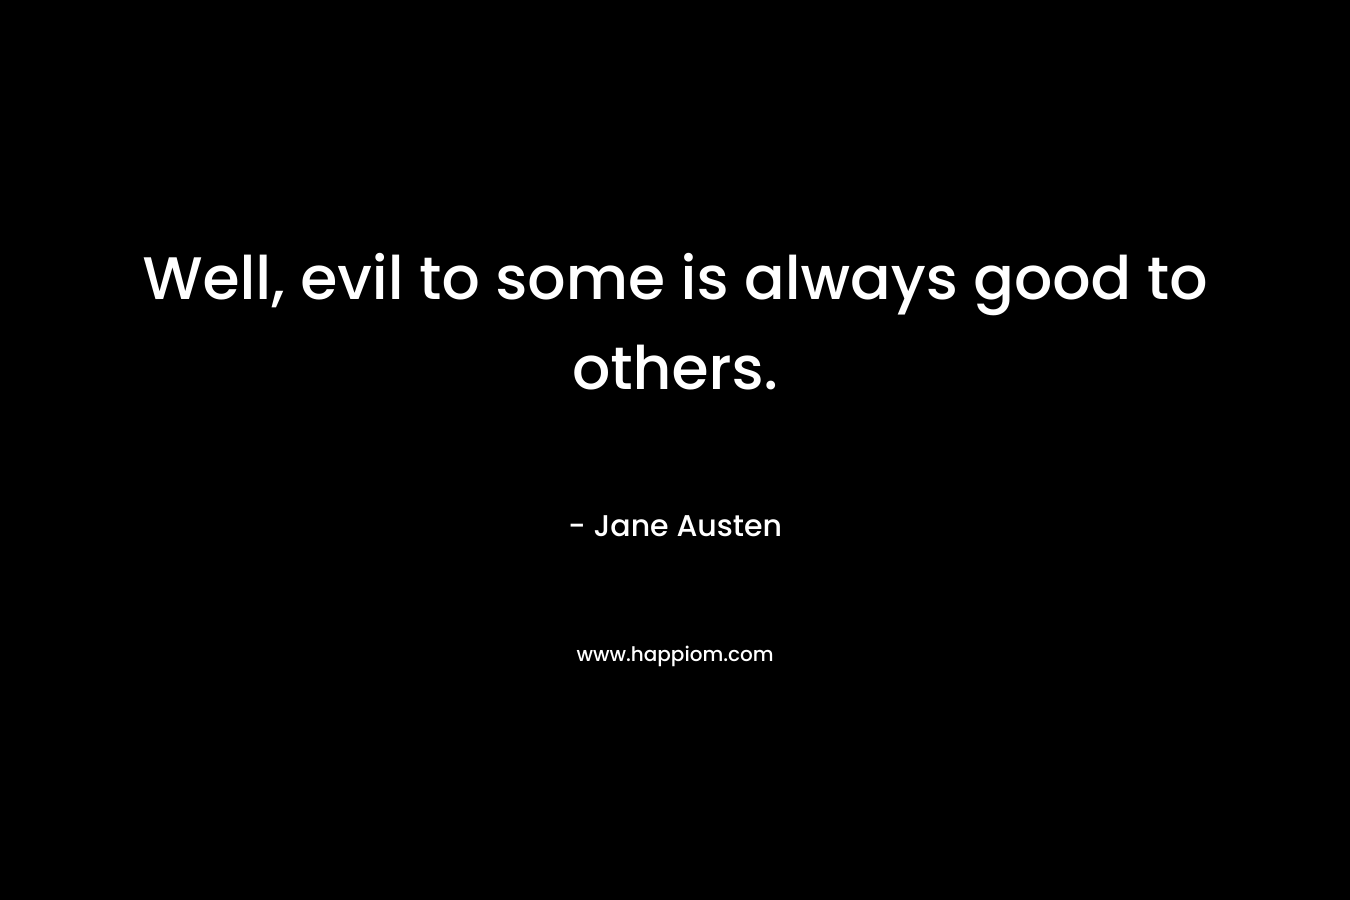 Well, evil to some is always good to others.